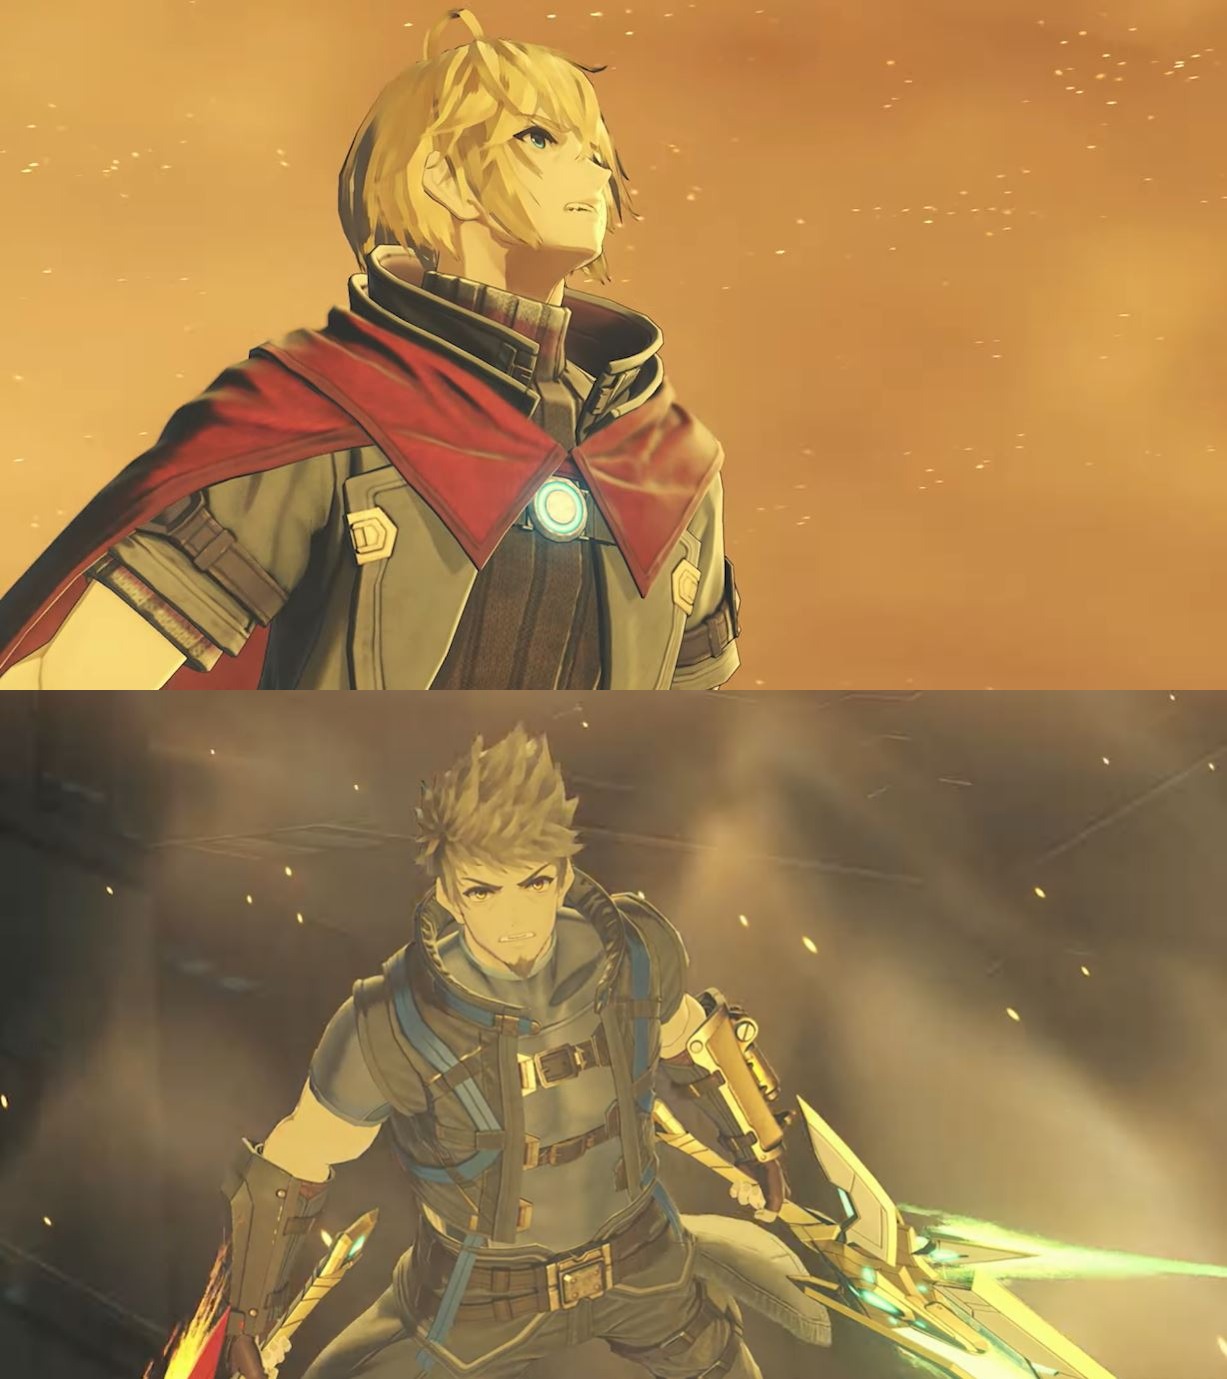 Xenoblade Chronicles 3: Shulk and Rex reveal stirs up fan theories